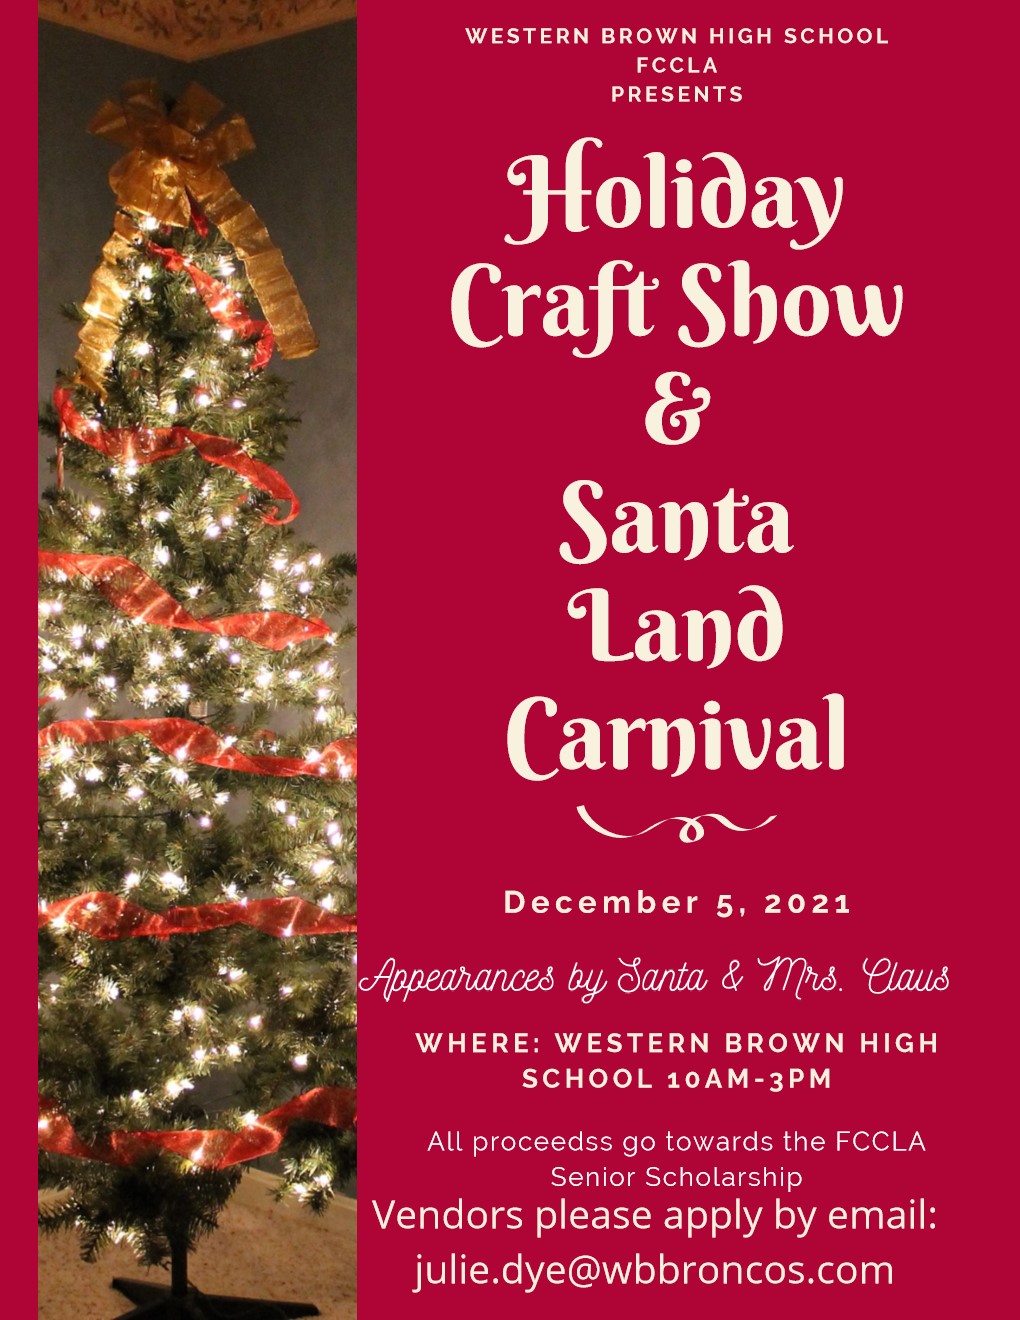 Western Brown High School Holiday Craft Show | The Clermont Sun